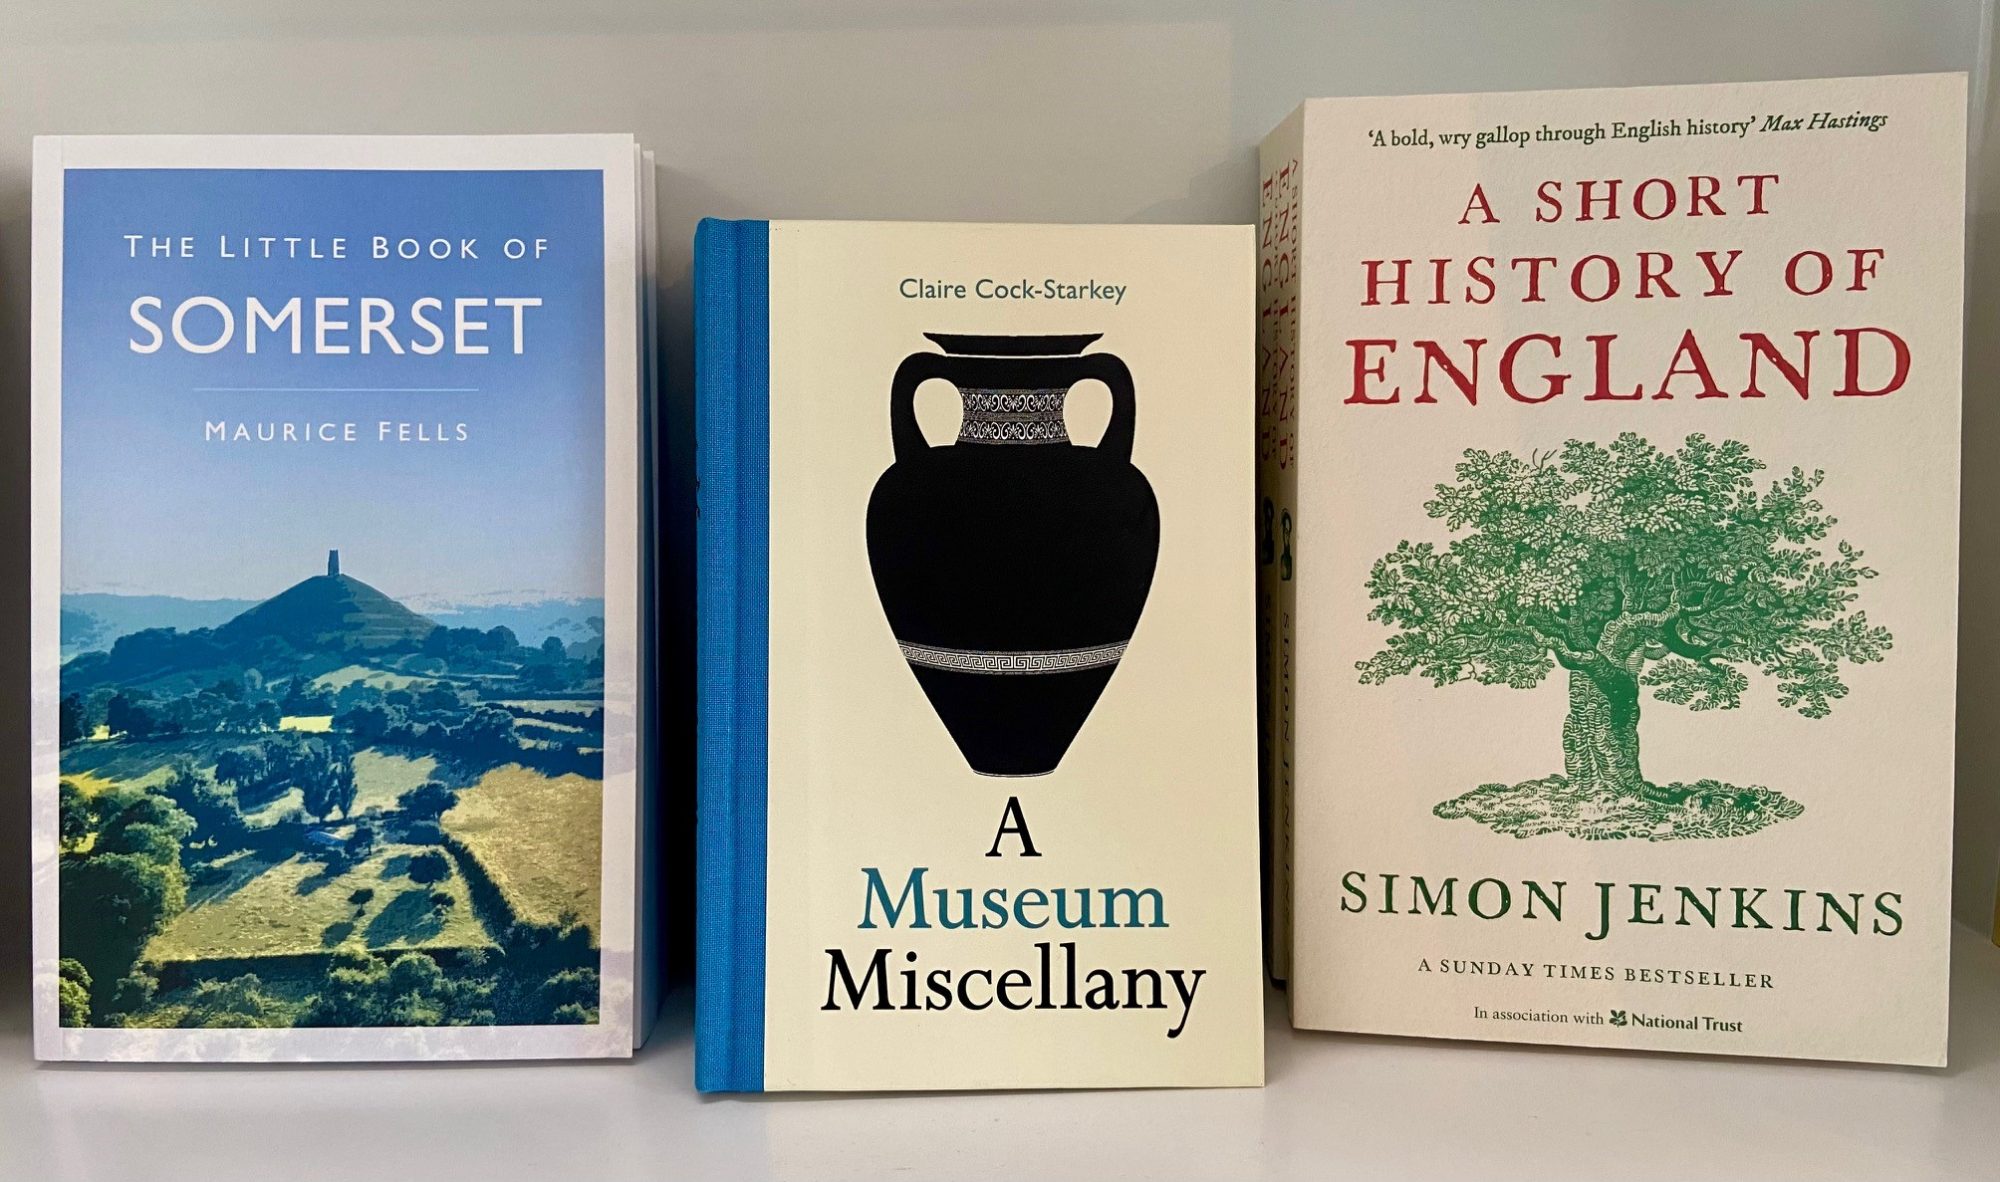 Books - The Little Book of Somerset by Maurice Fells, A Museum of Miscellany by Claire Cock-Starkey and A Short History of England by Simon Jenkins